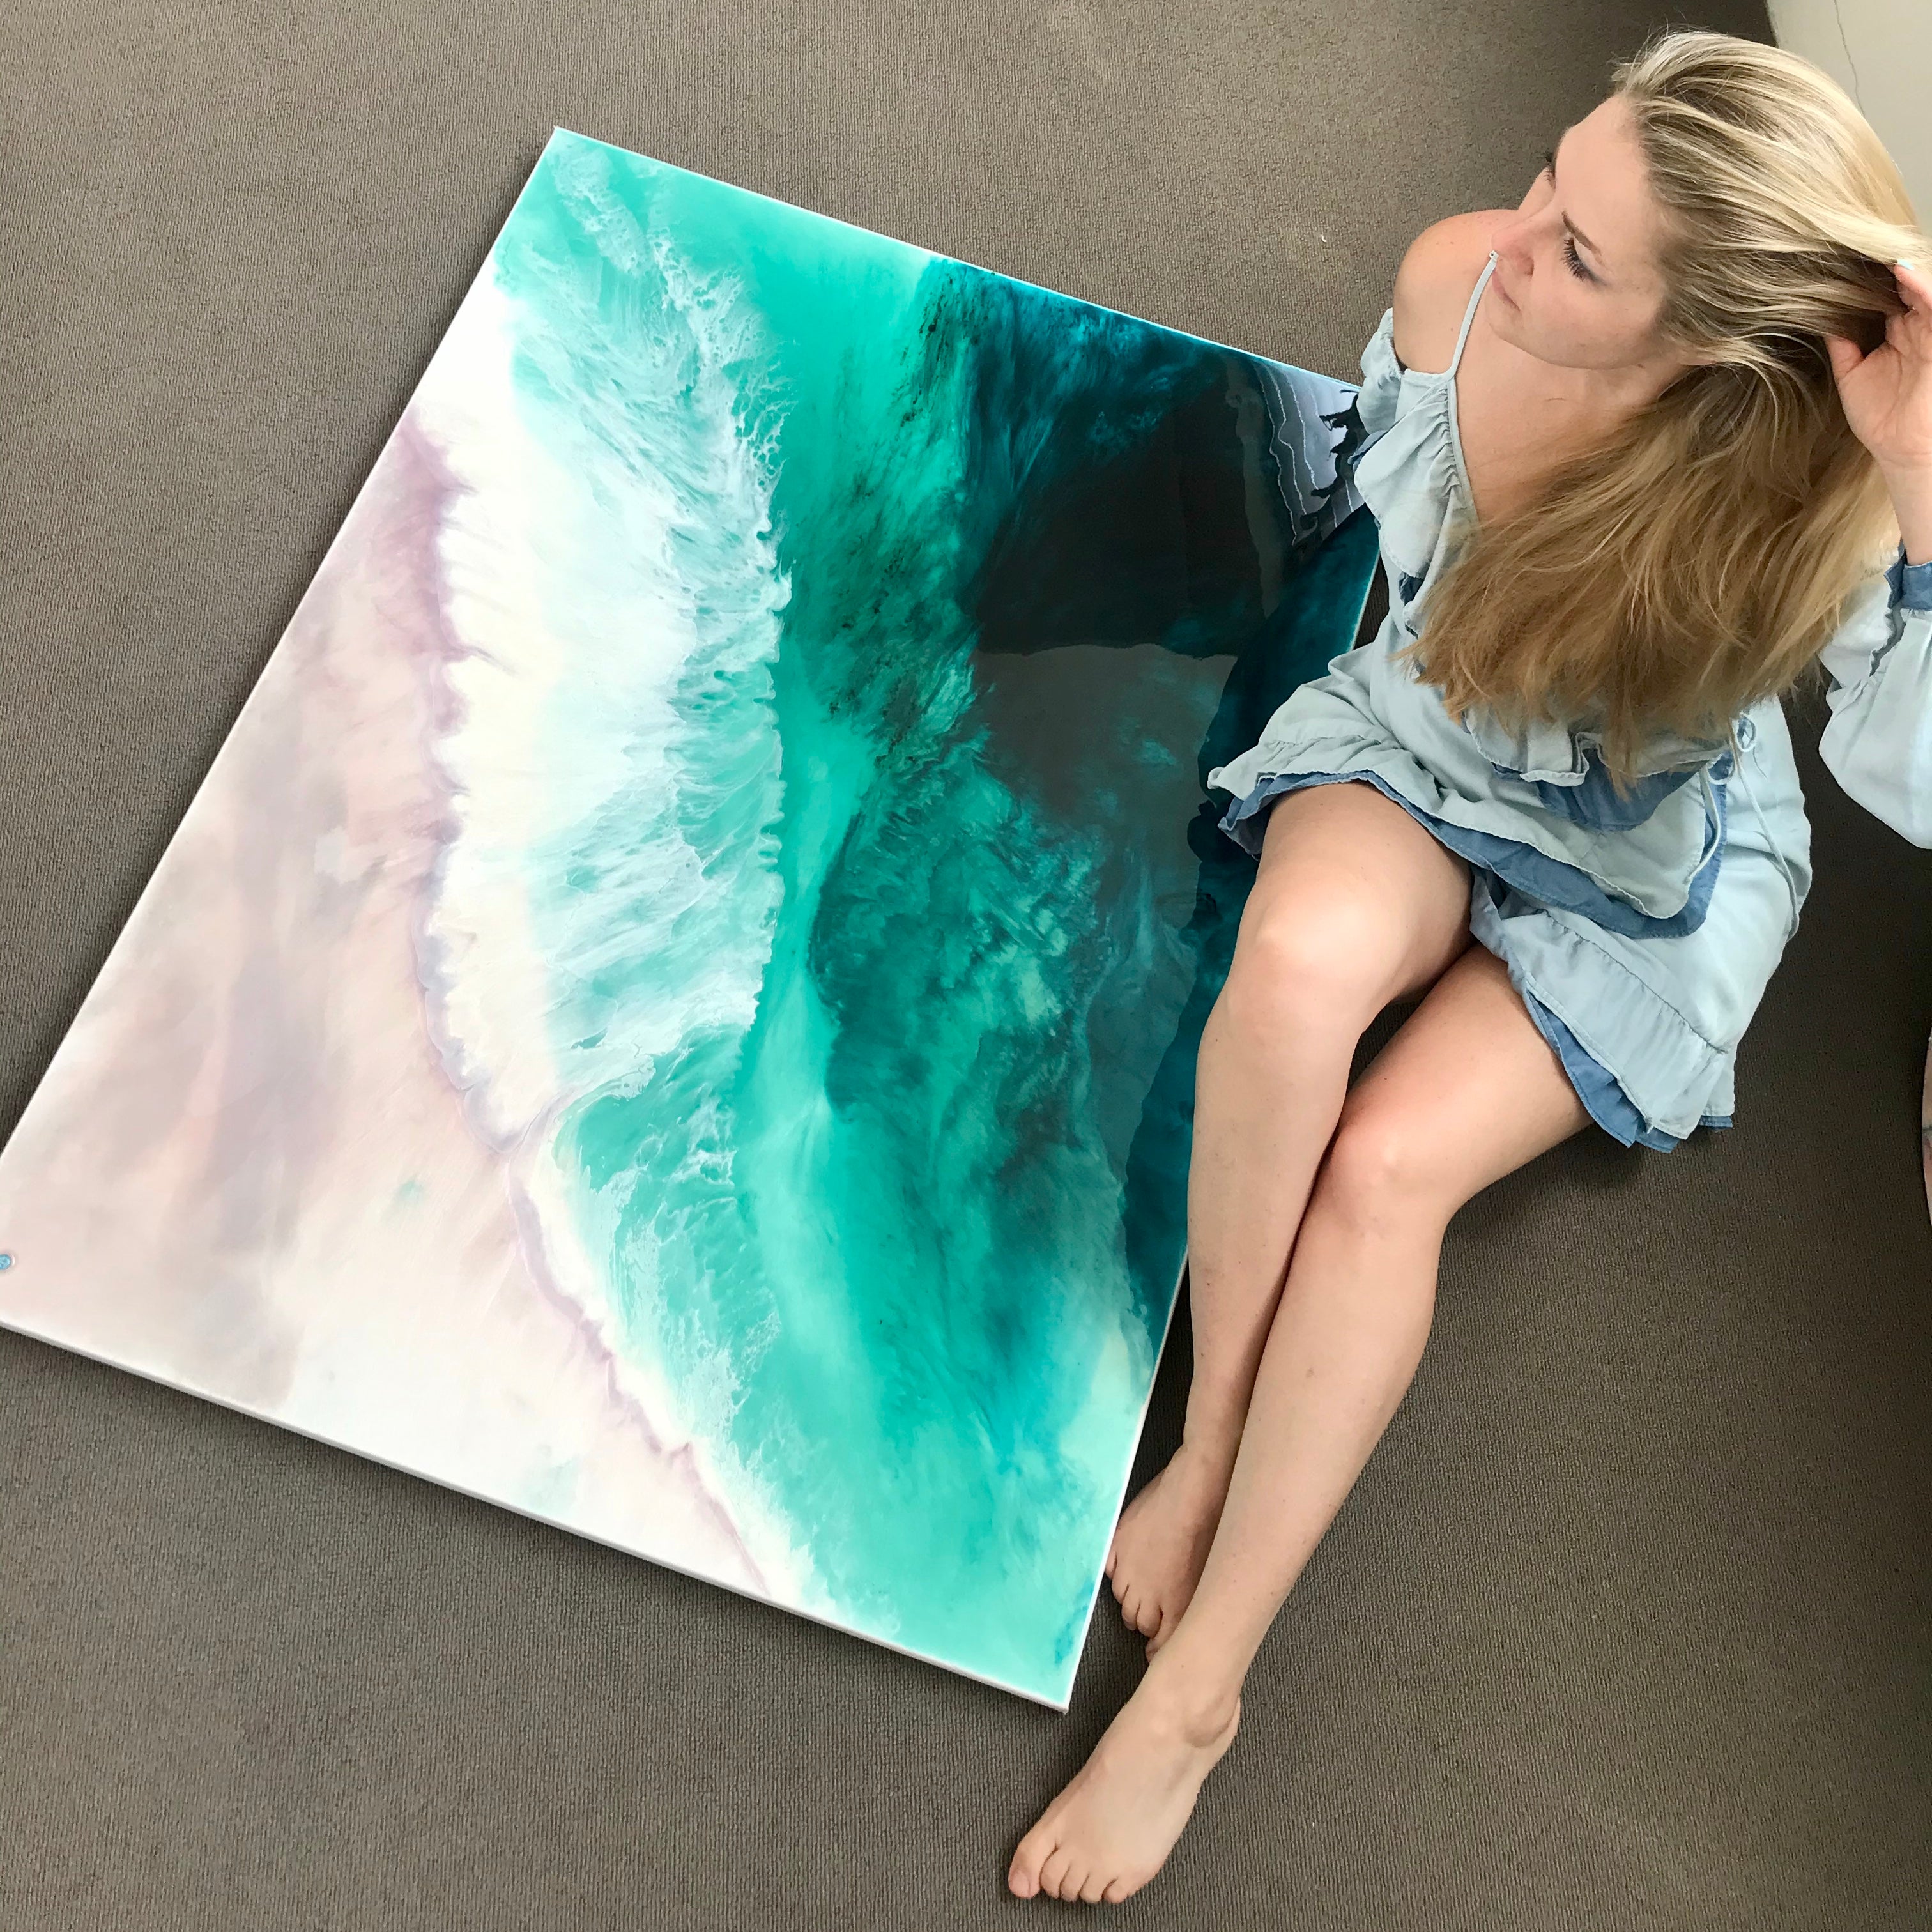 Teal Abstract Artwork. Ocean Blue. Bronte Undercurrent. Antuanelle 1 Undercurrent. Green and Pink Abstract. Original 90x120 cm